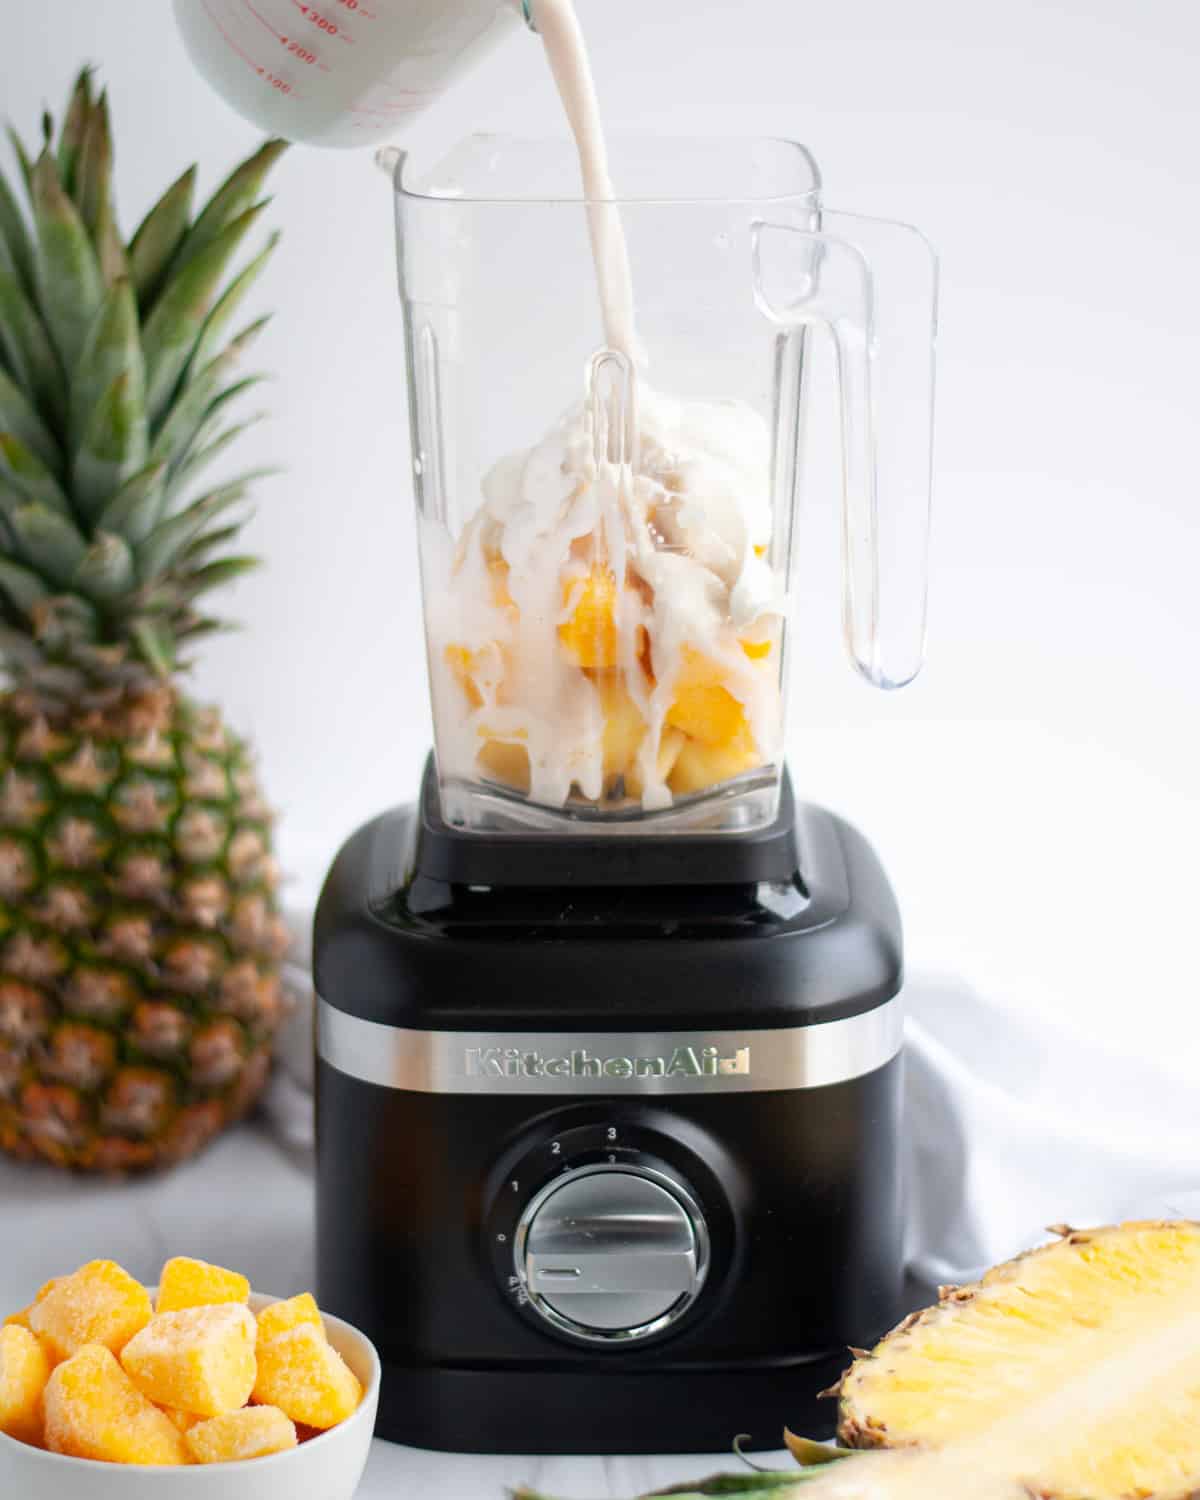 process shot showing how to make a mango pineapple smoothie, showing ingredients being added to a blender.